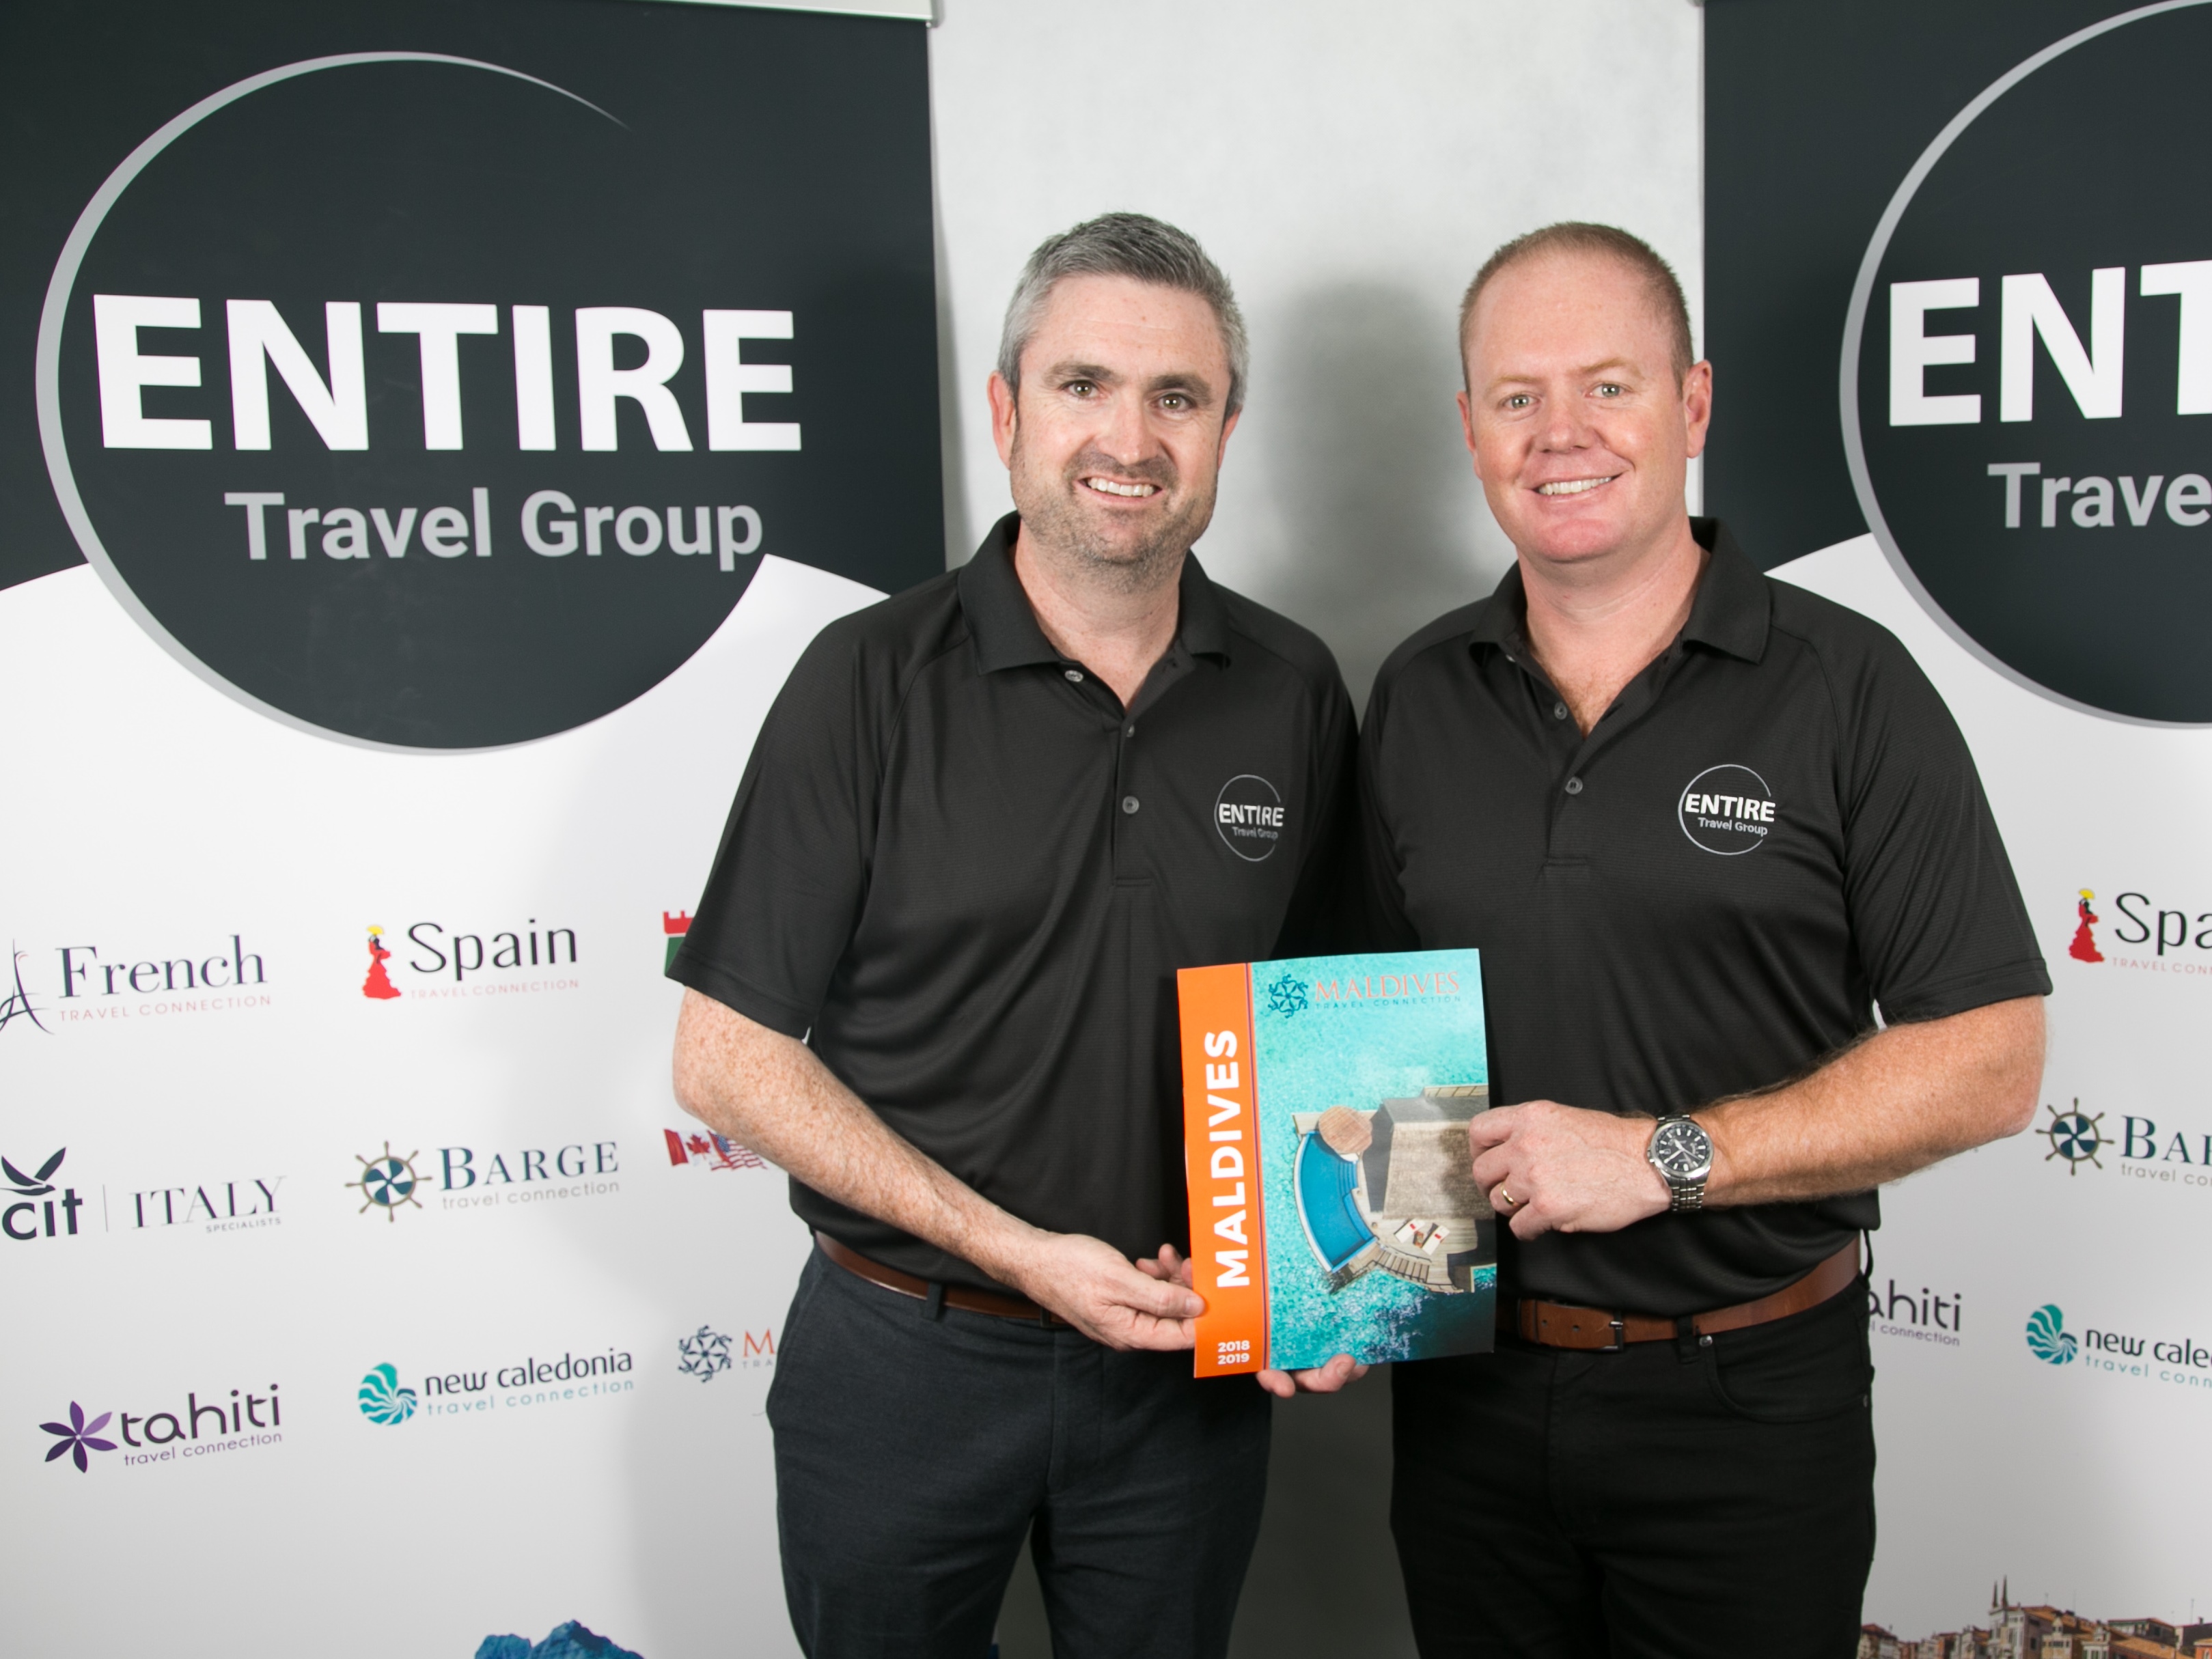 (L-R) Entire Travel Group Sales & Marketing Director Greg McCallum and CEO Brad McDonnell